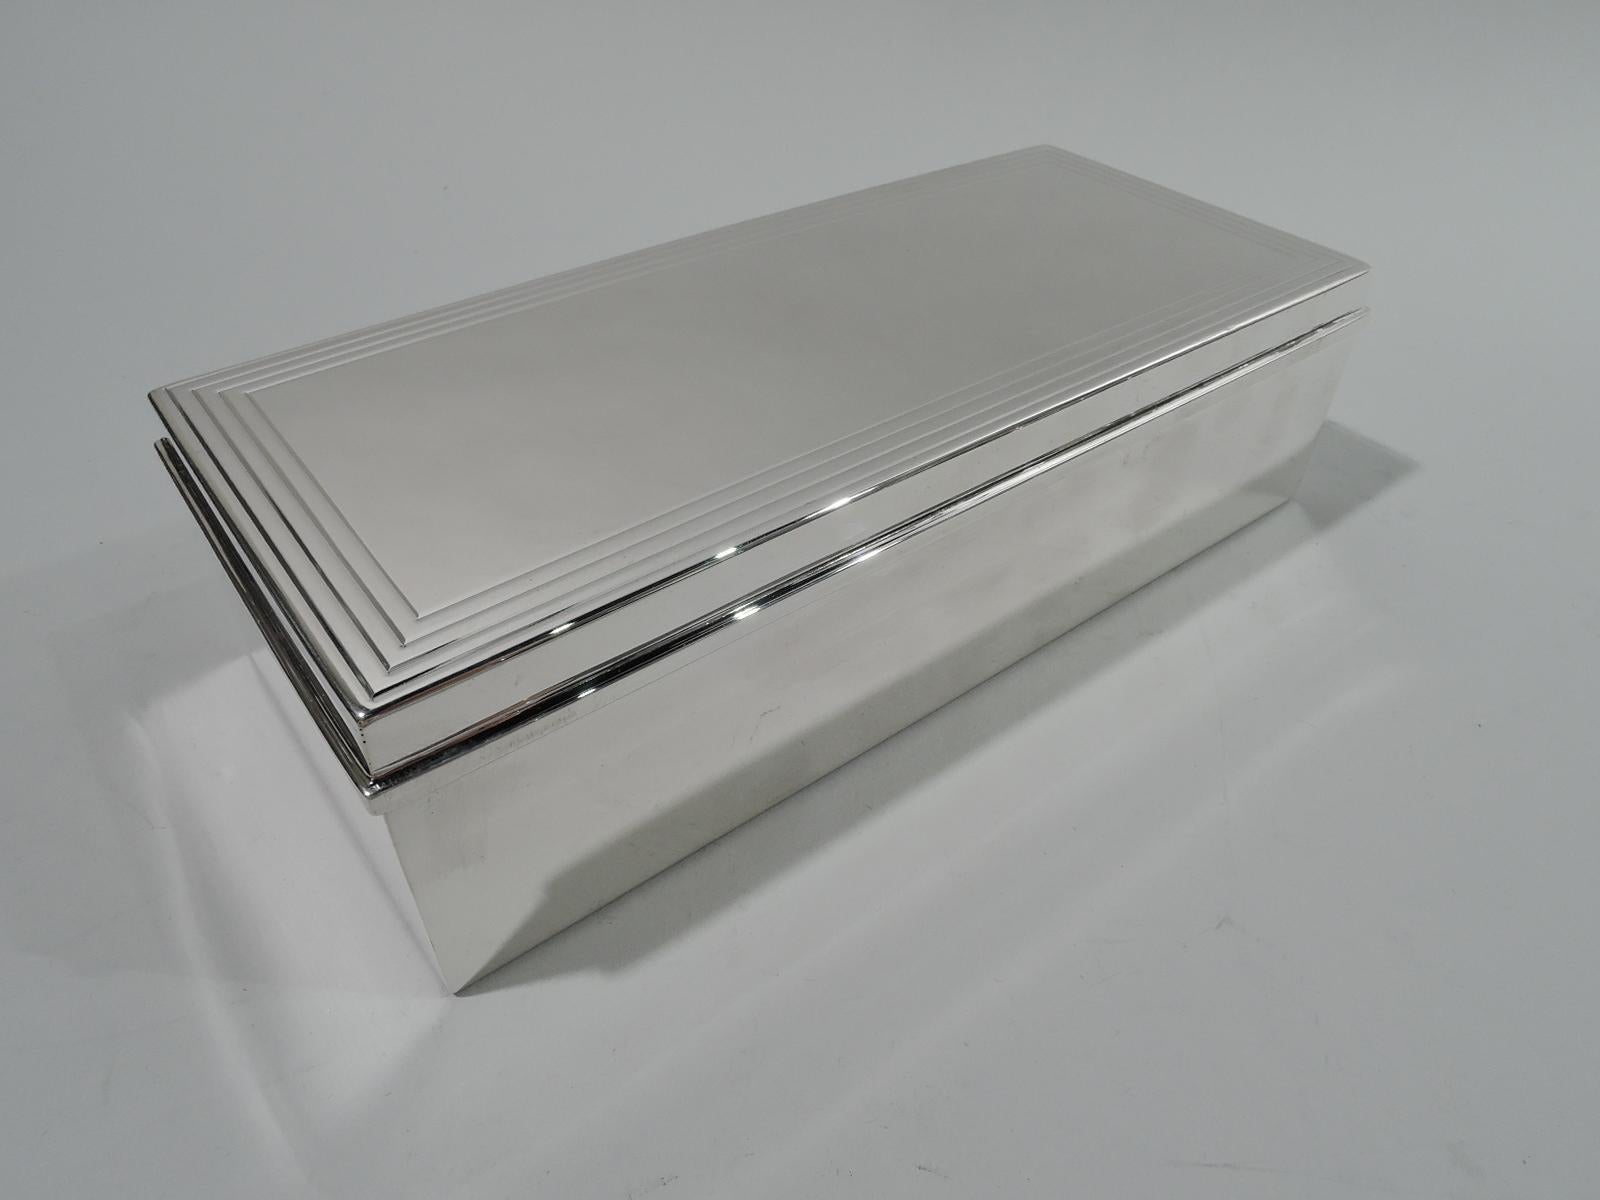 Mid-Century Modern sterling silver box. Made by Tiffany & Co. in New York. Rectangular with straight sides. Cover flat and hinged with molded rim. Cover top has wraparound linear border. Box interior cedar lined and partitioned. Cover interior gilt.